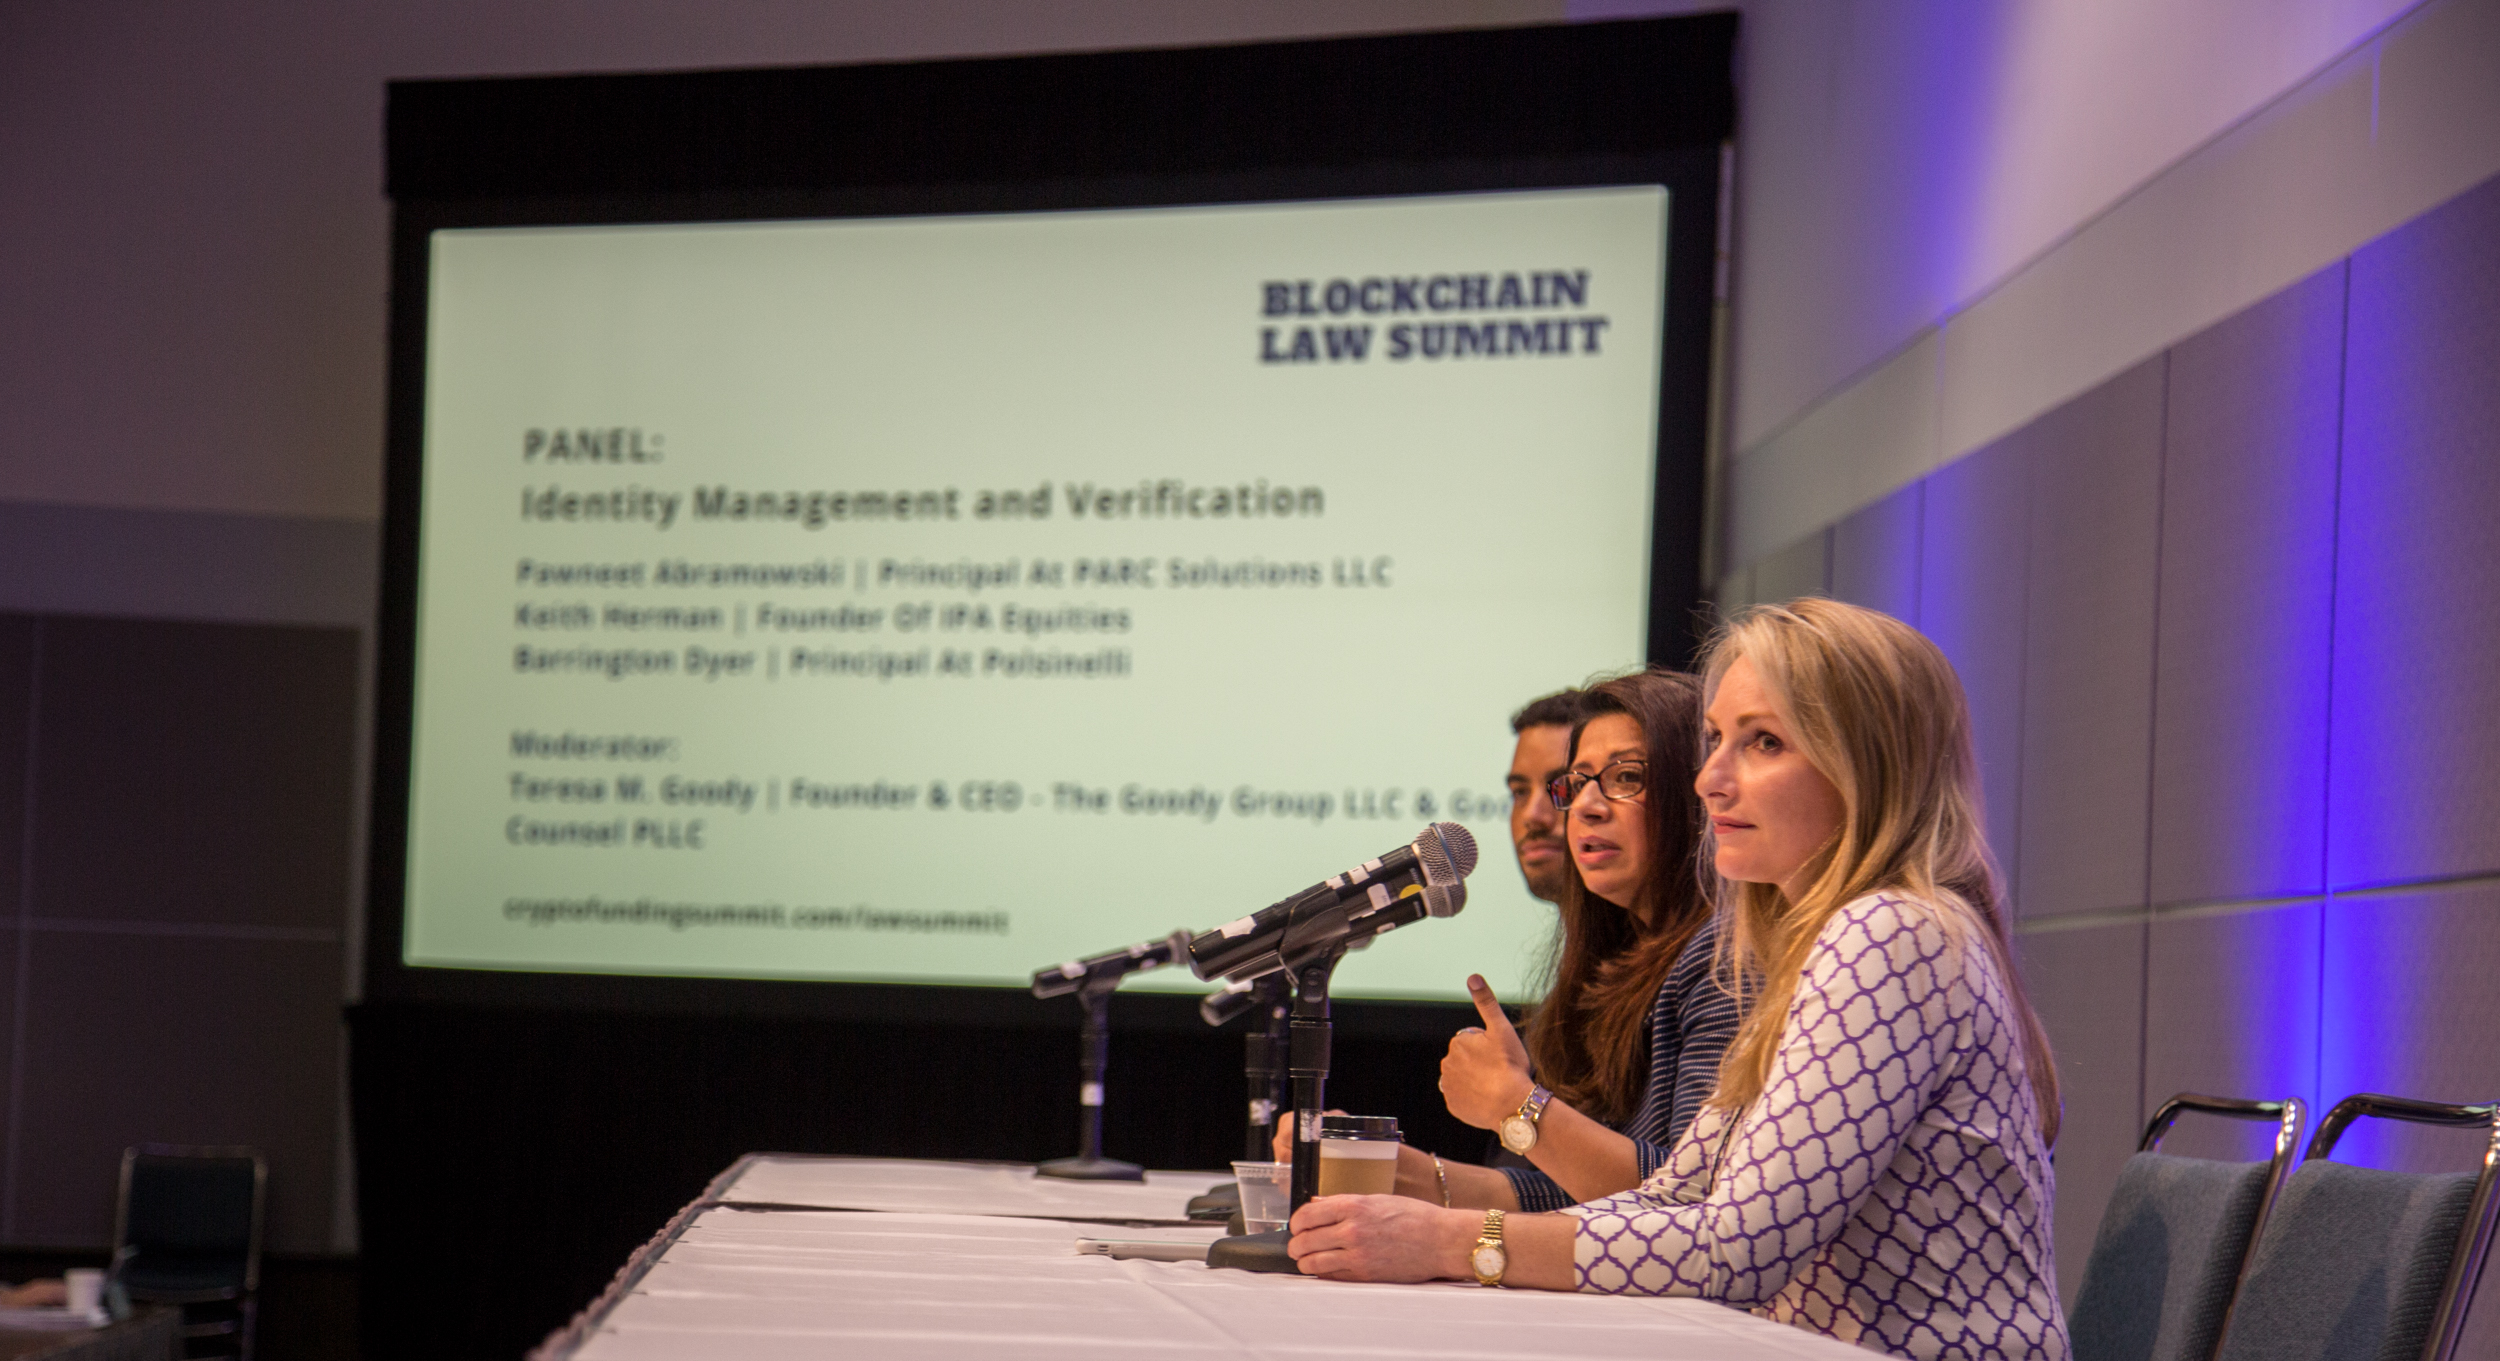 Panel Discussion @ Blockchain Law Summit - Los Angeles Convention Center